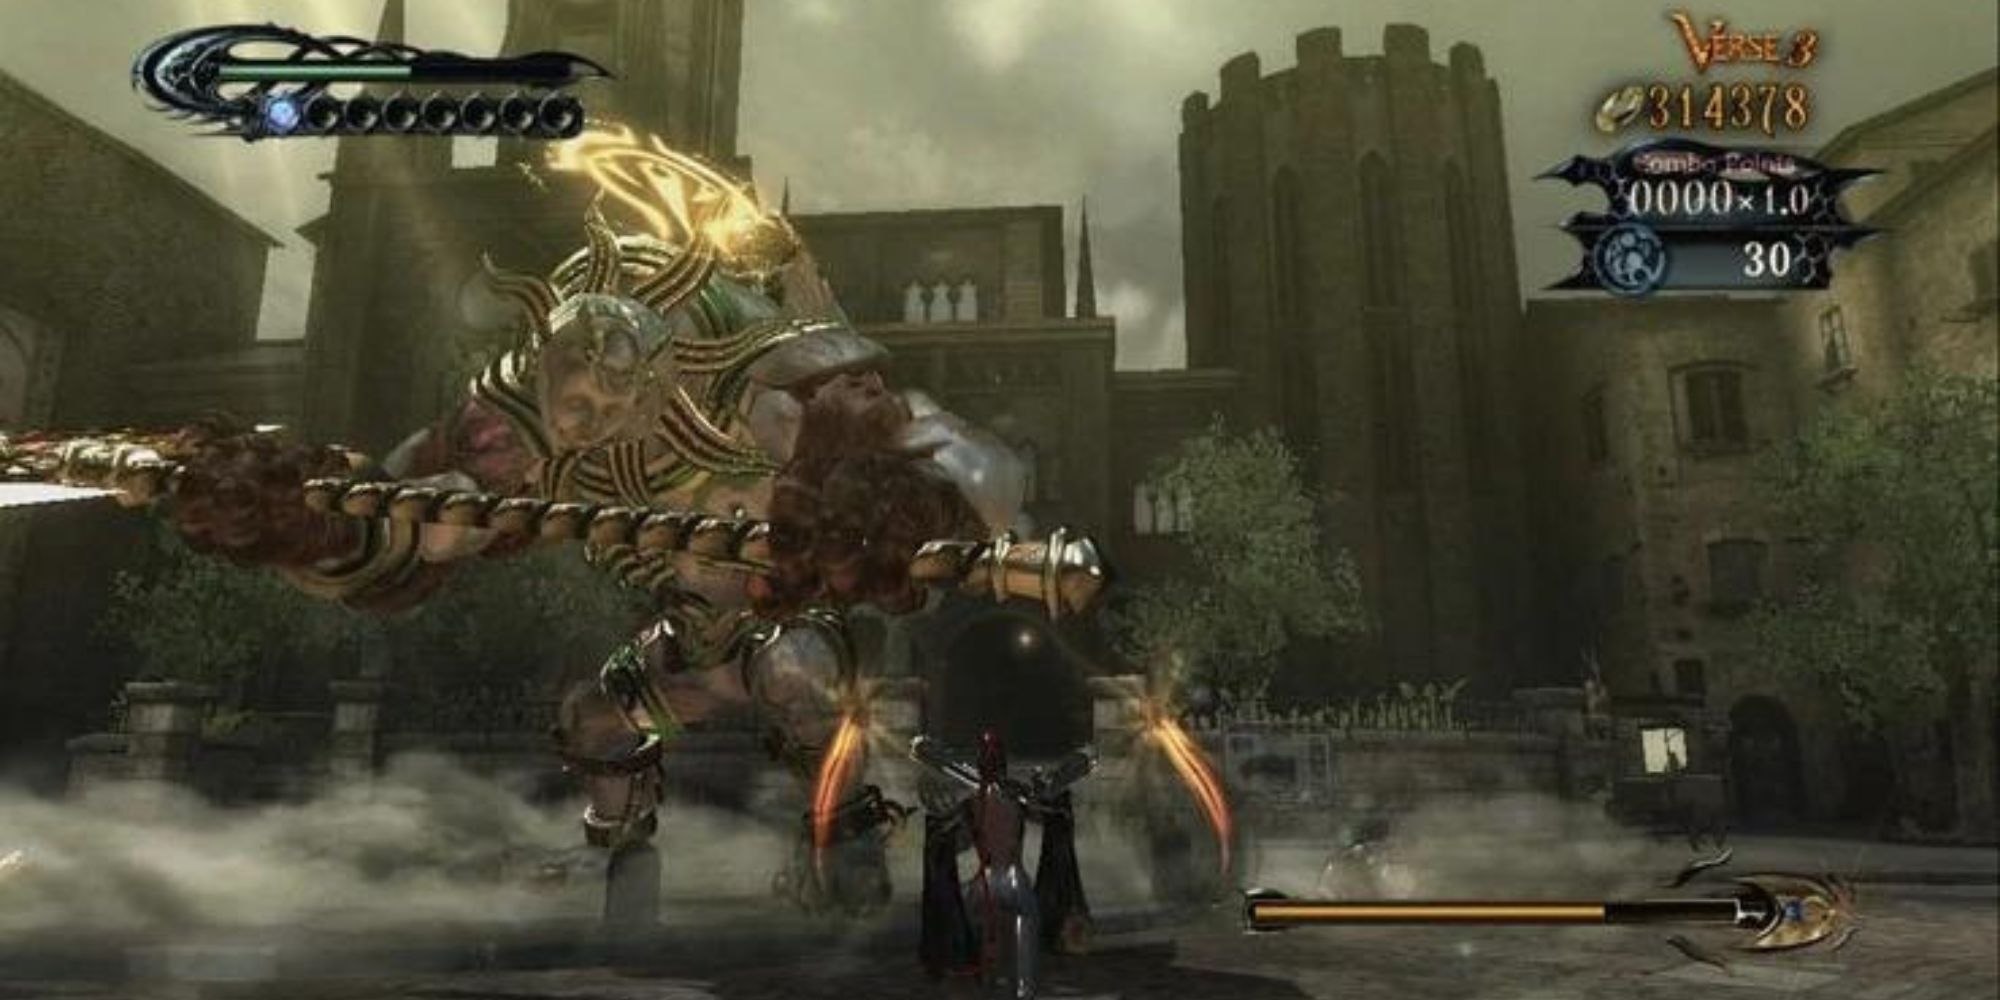 The Beloved angel foe in Bayonetta attacking the player